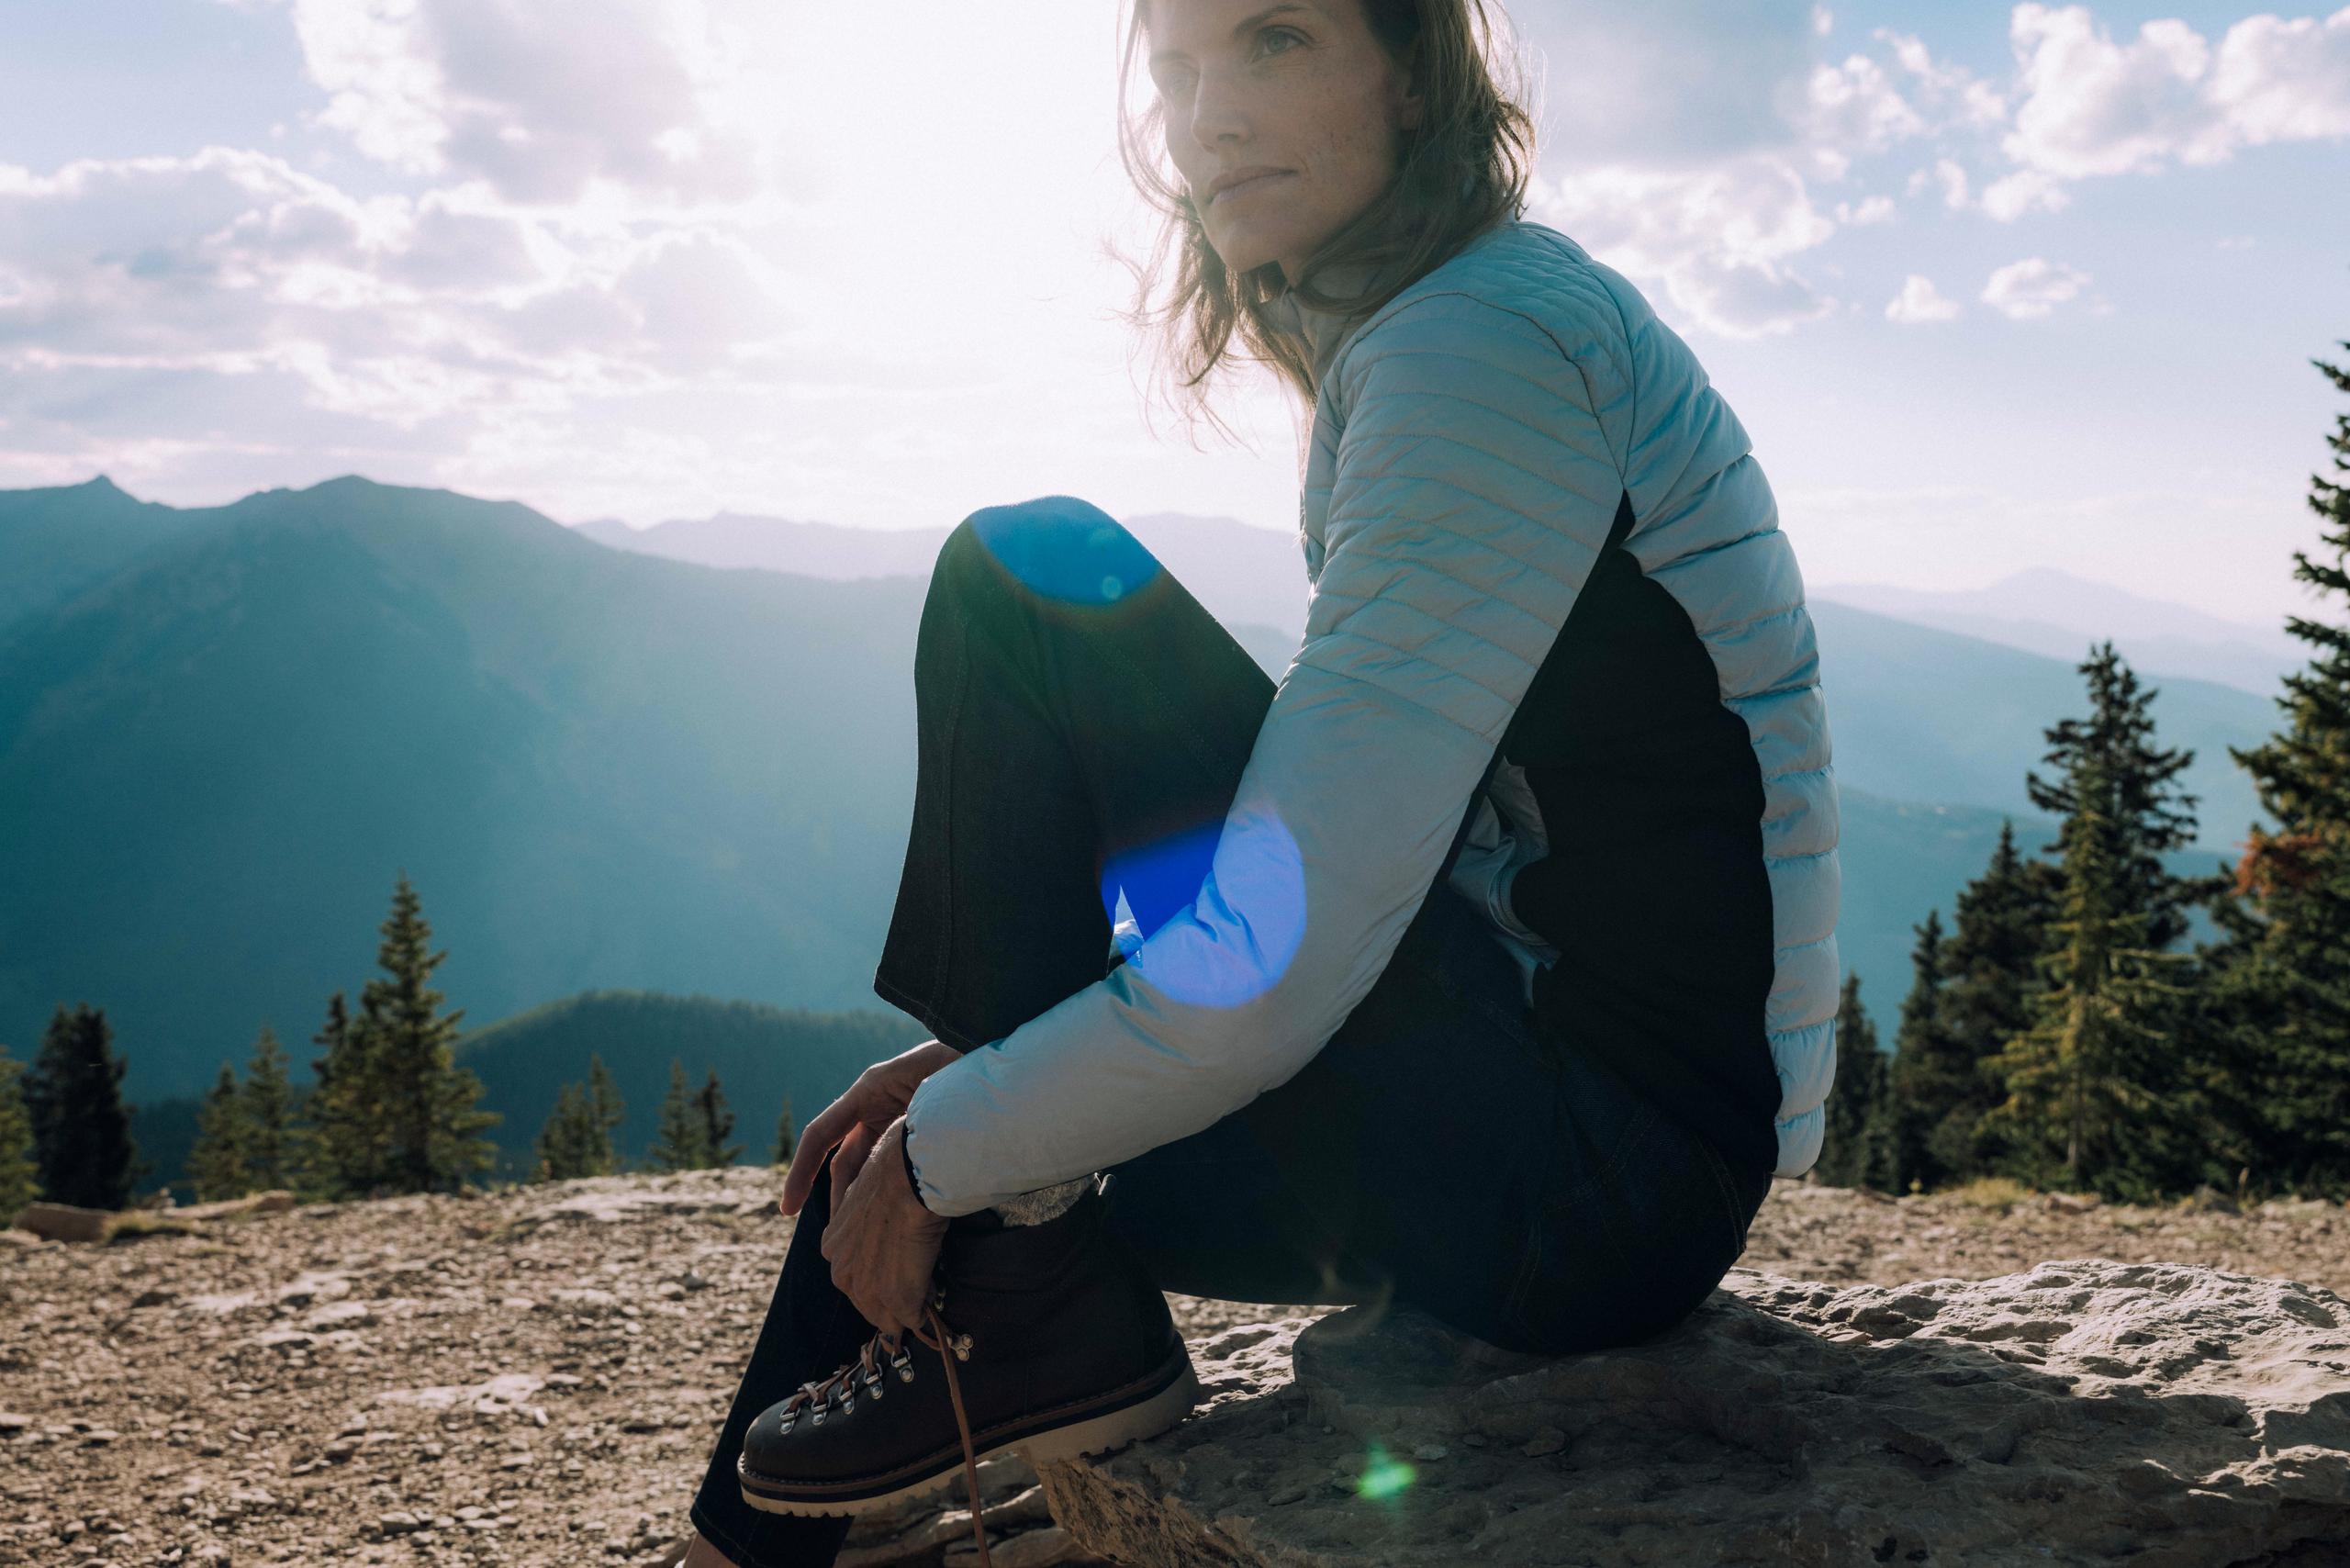 Profile of woman sitting on rock tying her shoelaces in front of Aspen mountains